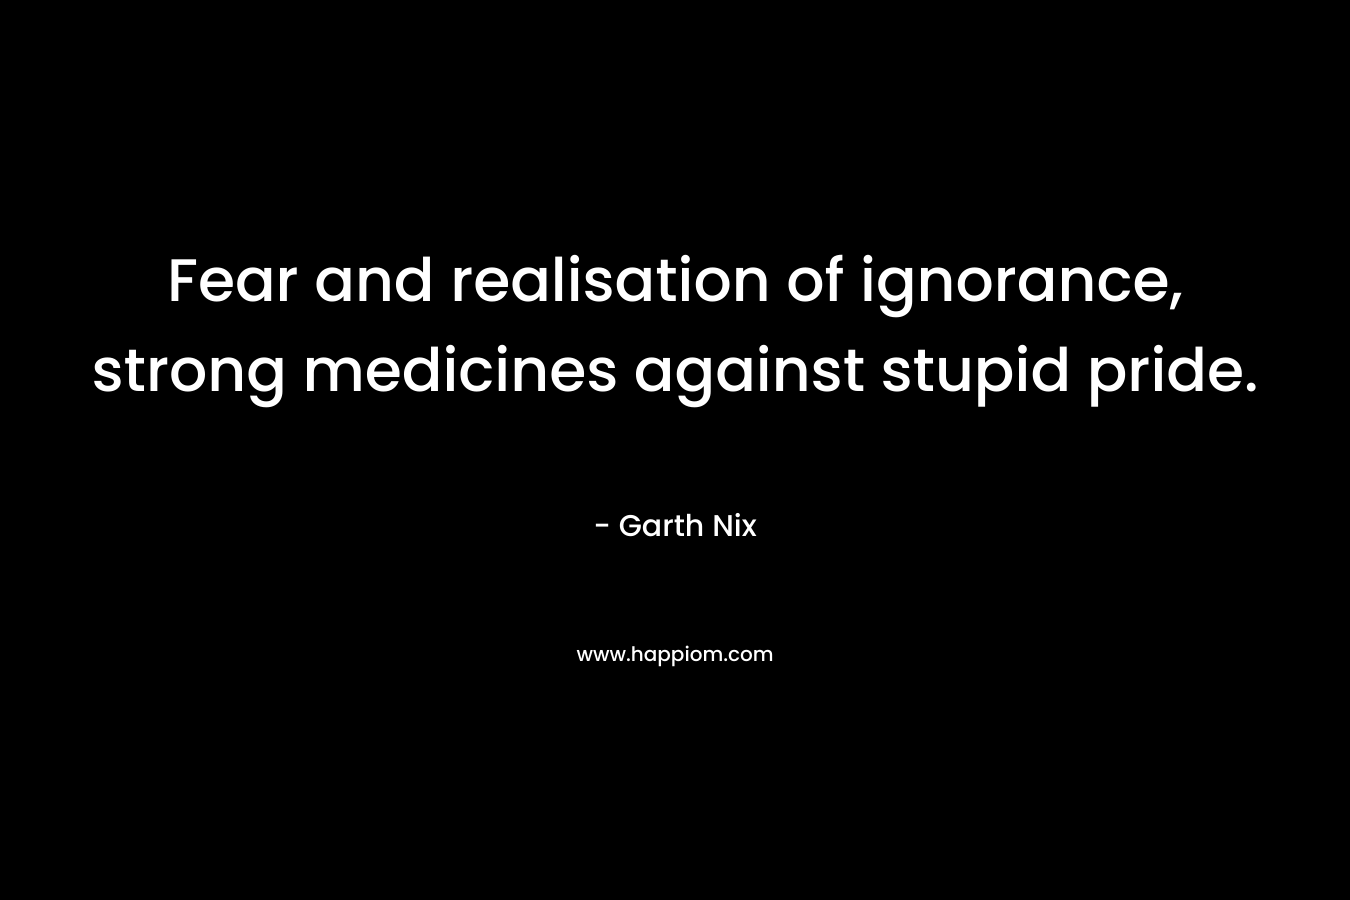 Fear and realisation of ignorance, strong medicines against stupid pride. – Garth Nix